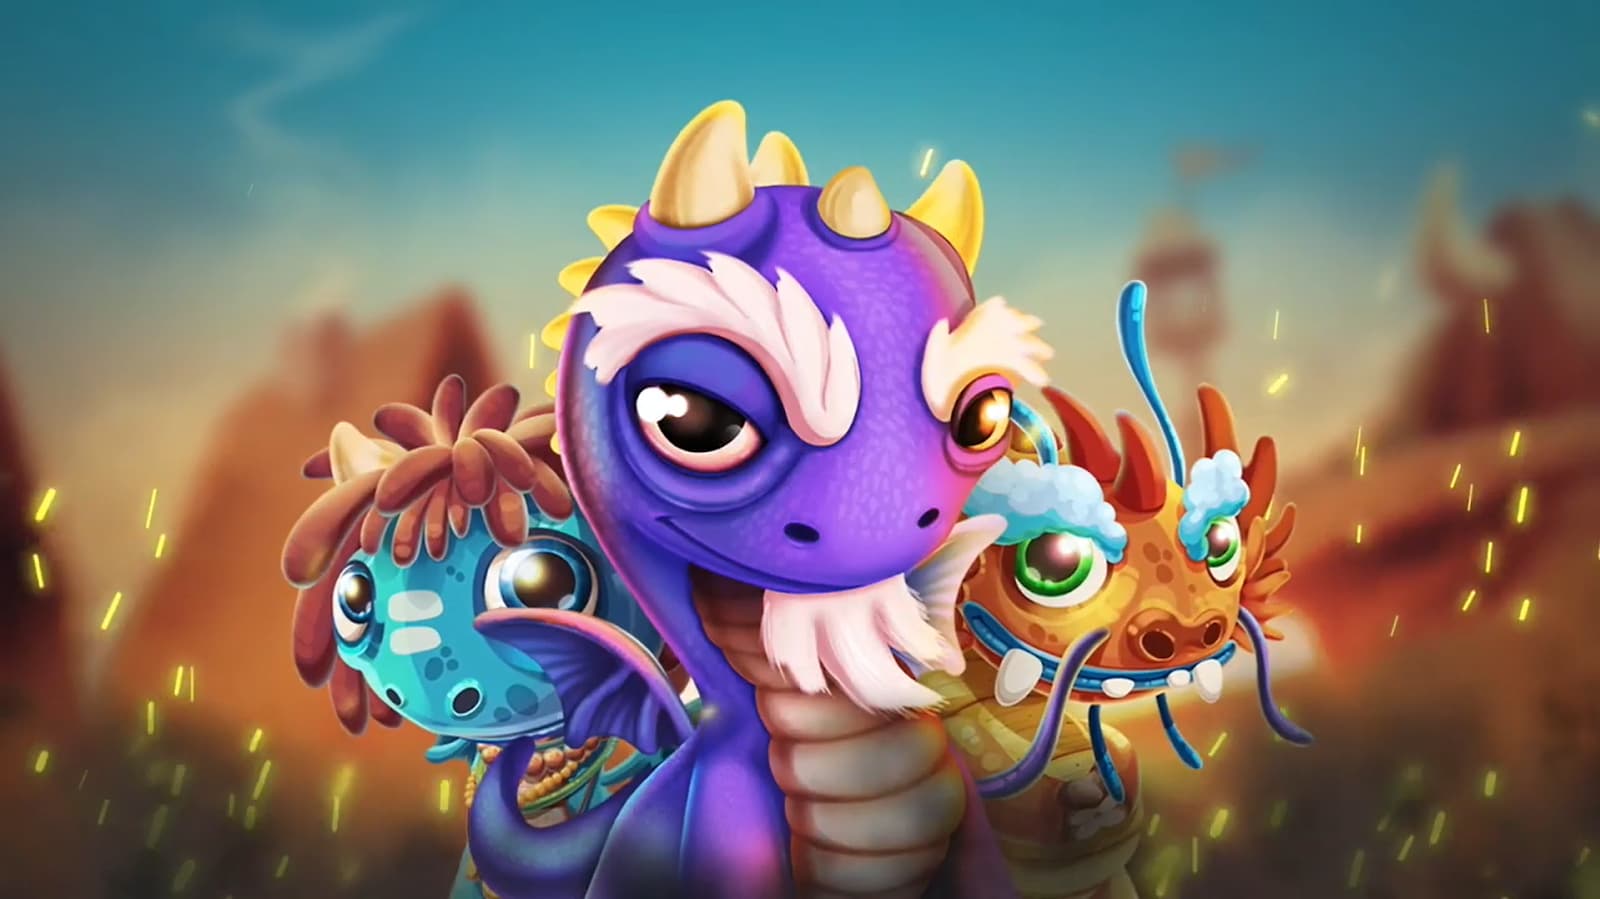 A whimsical purple dragon with its colorful dragonlings